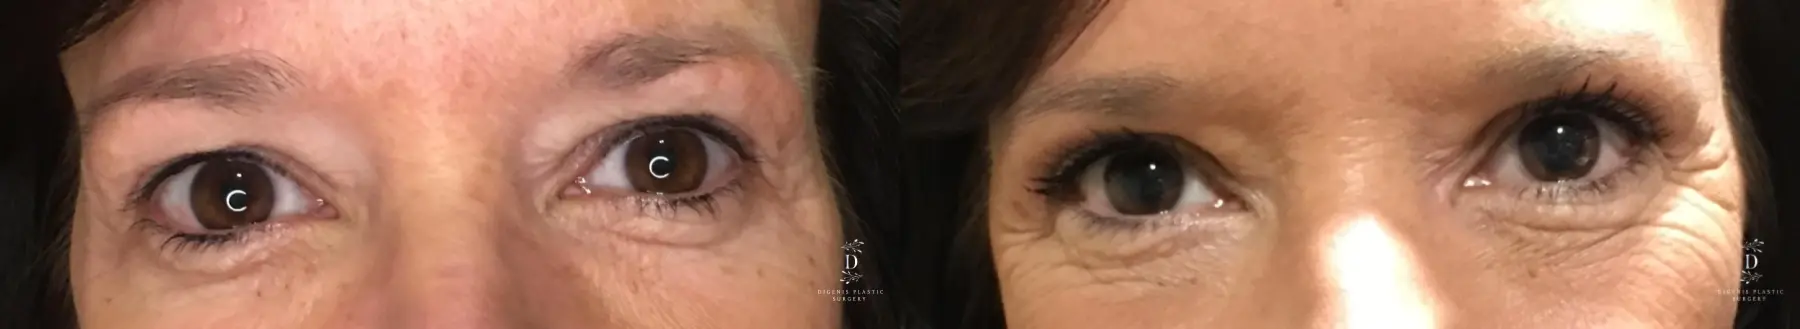 Eyelid Surgery: Patient 27 - Before and After 1